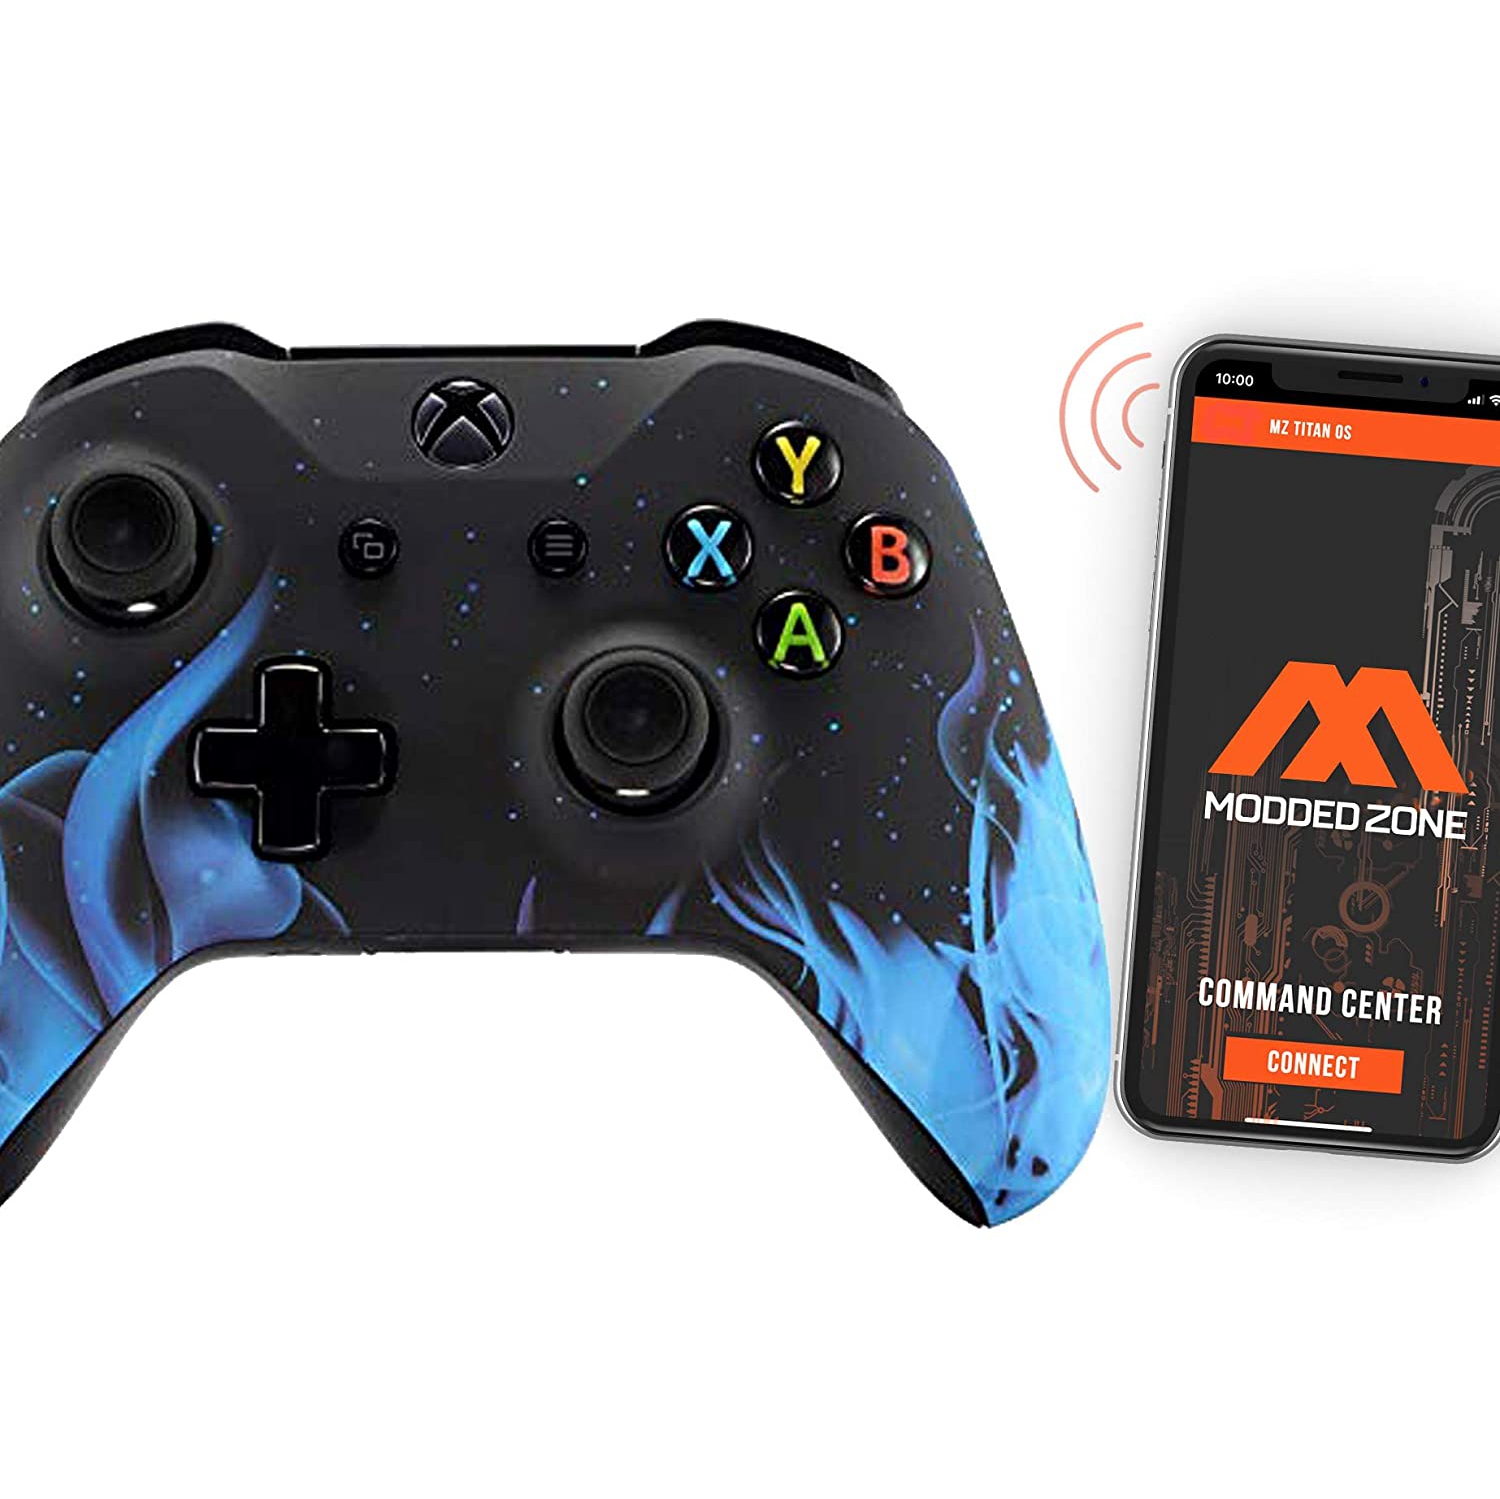 "Blue Fire" Rapid Fire Custom Standard Modded Controller Compatible with Xbox One S/X 40 Mods for All Major Shooter Games (3.5 mm Jack)